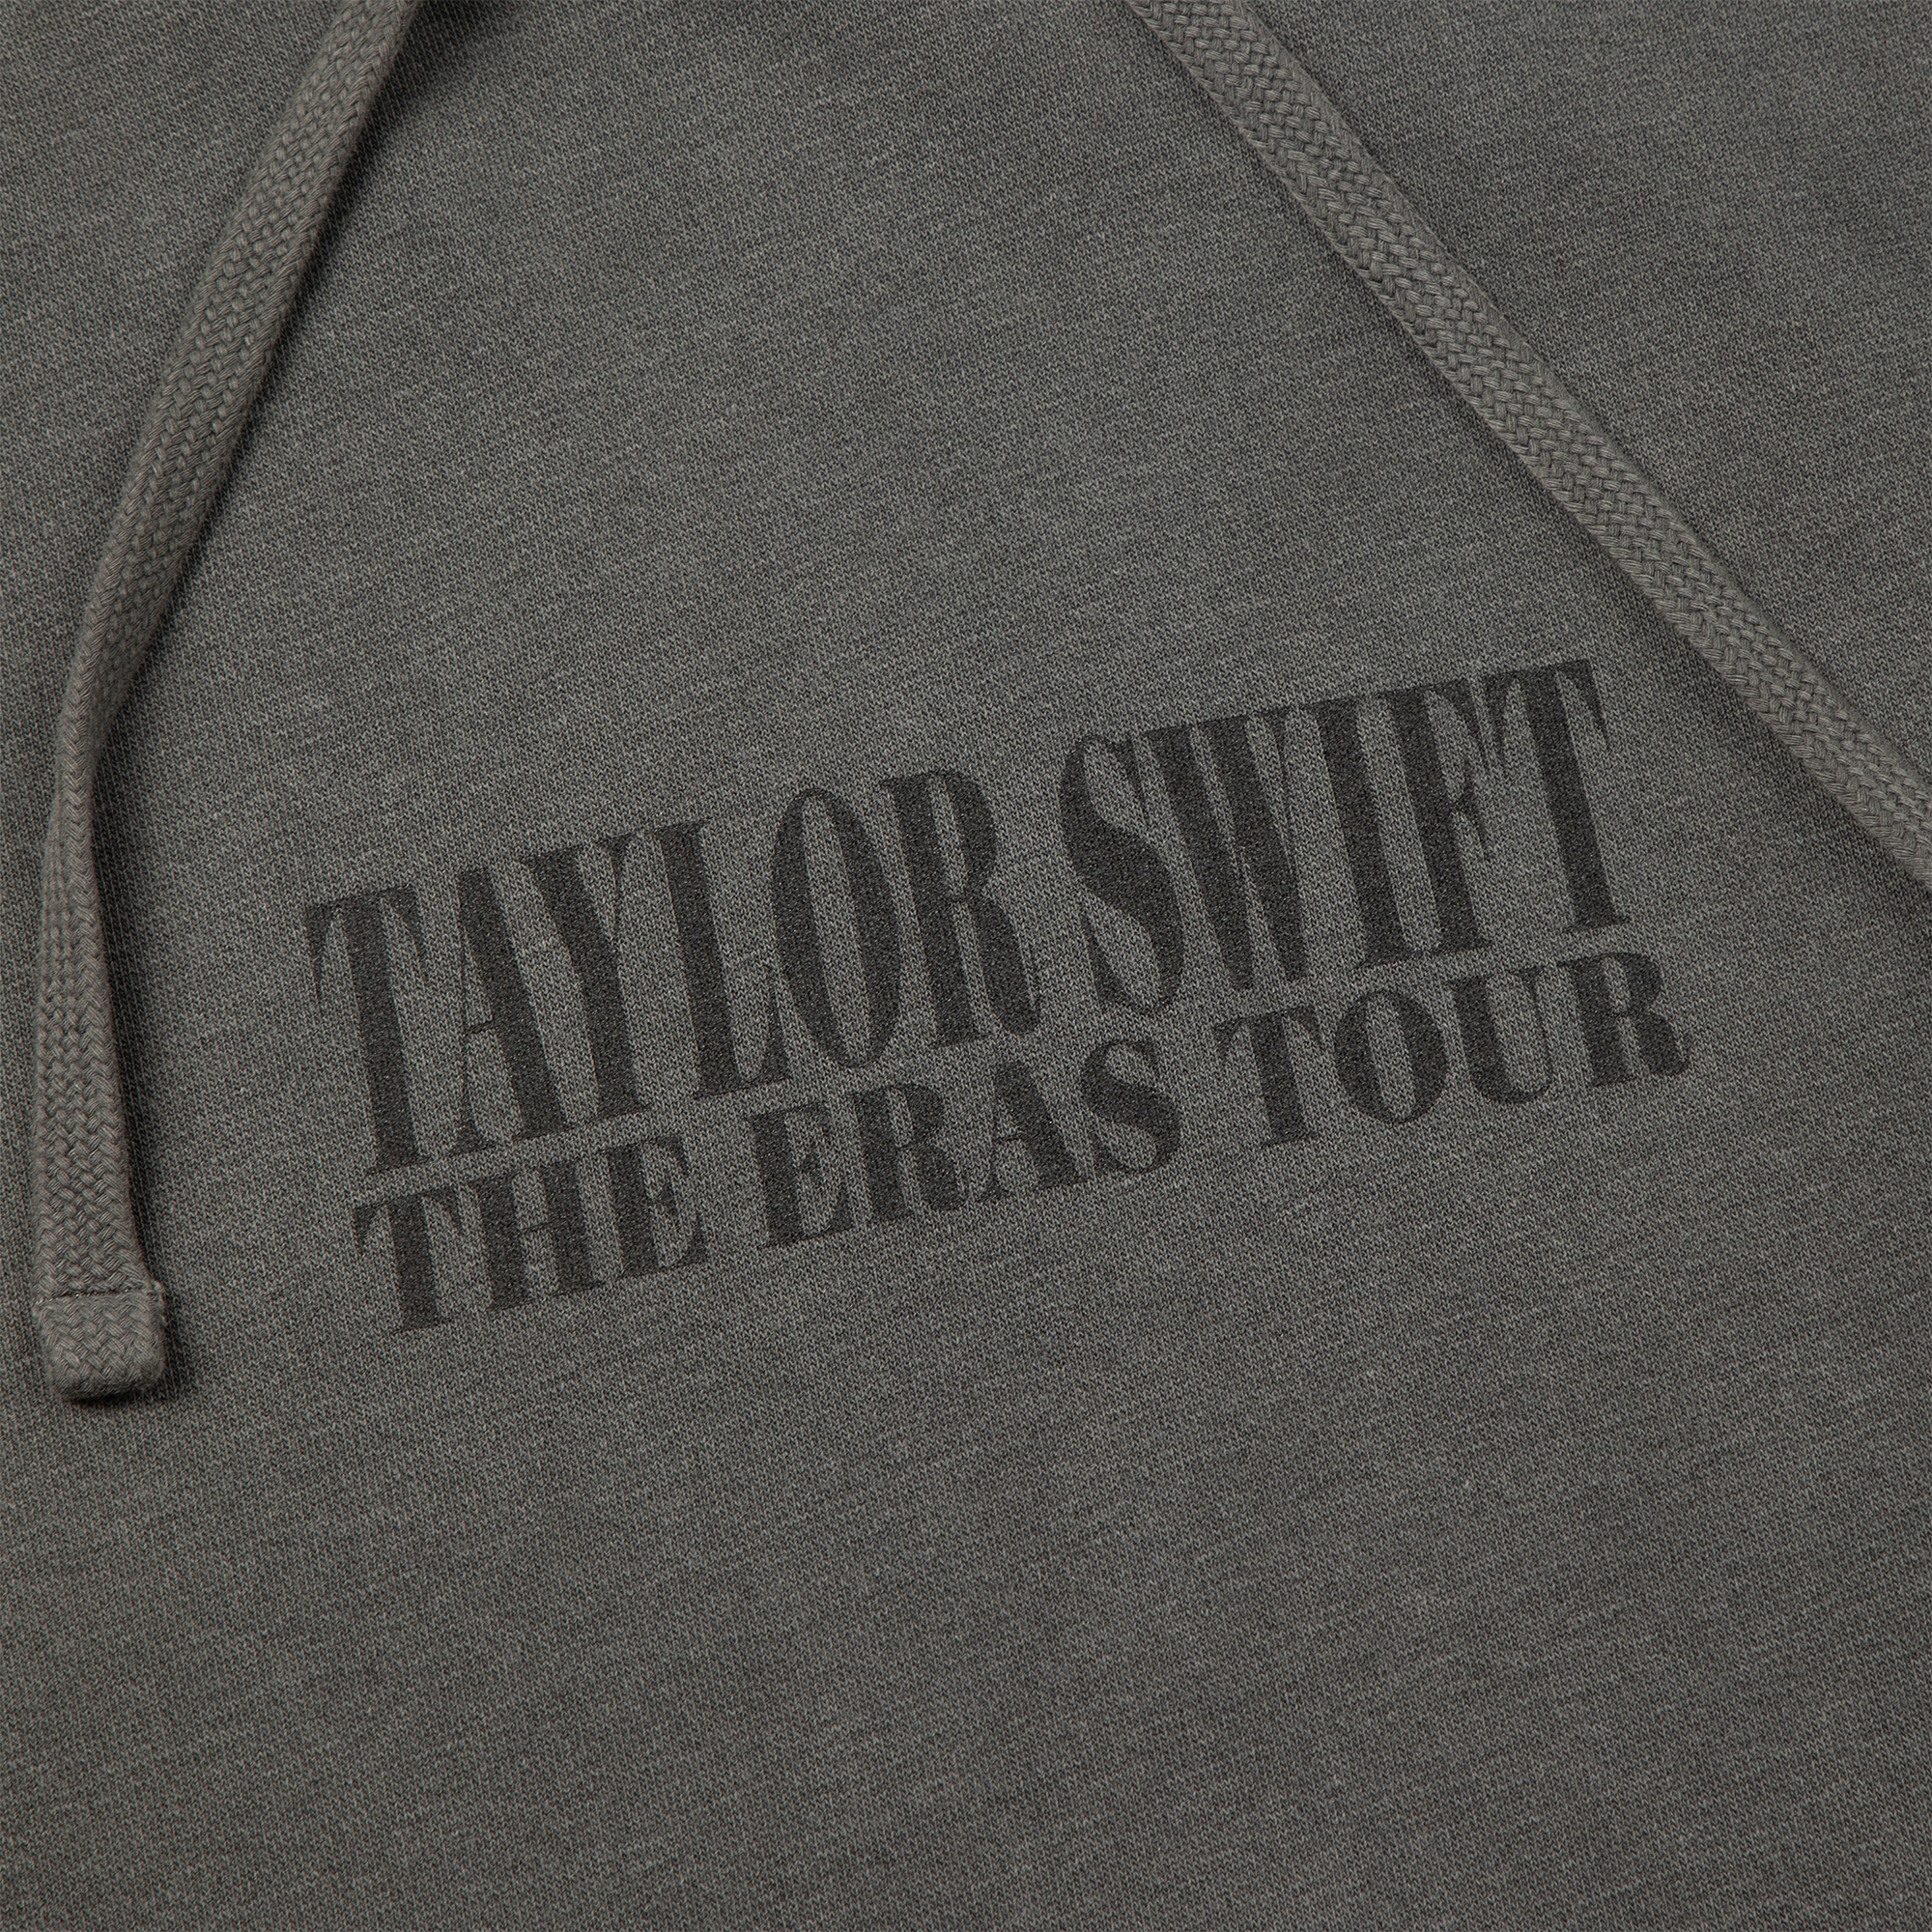 Taylor Swift | The Eras Tour Charcoal Hoodie Front Detail